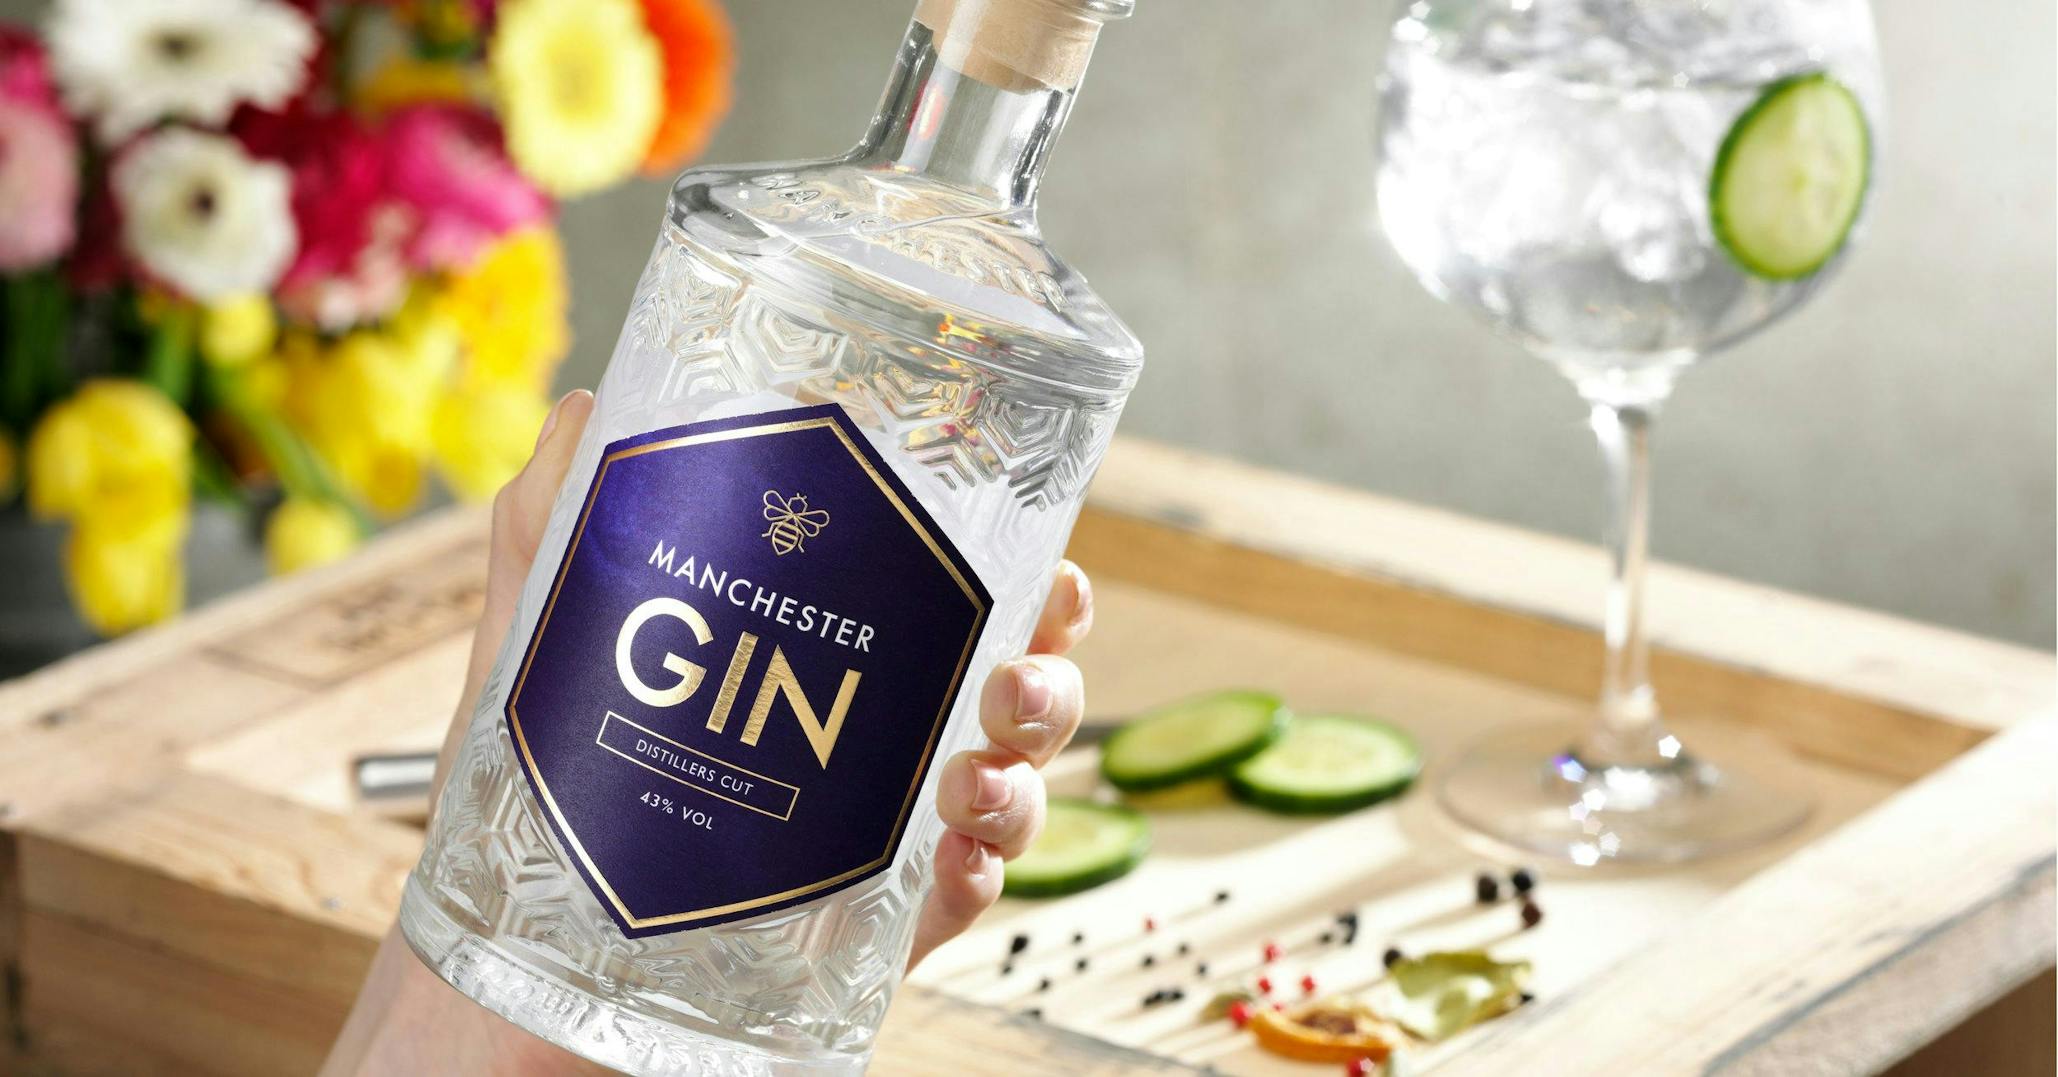 Say hello to April's Gin of the Month: Manchester Gin Distillers Cut!